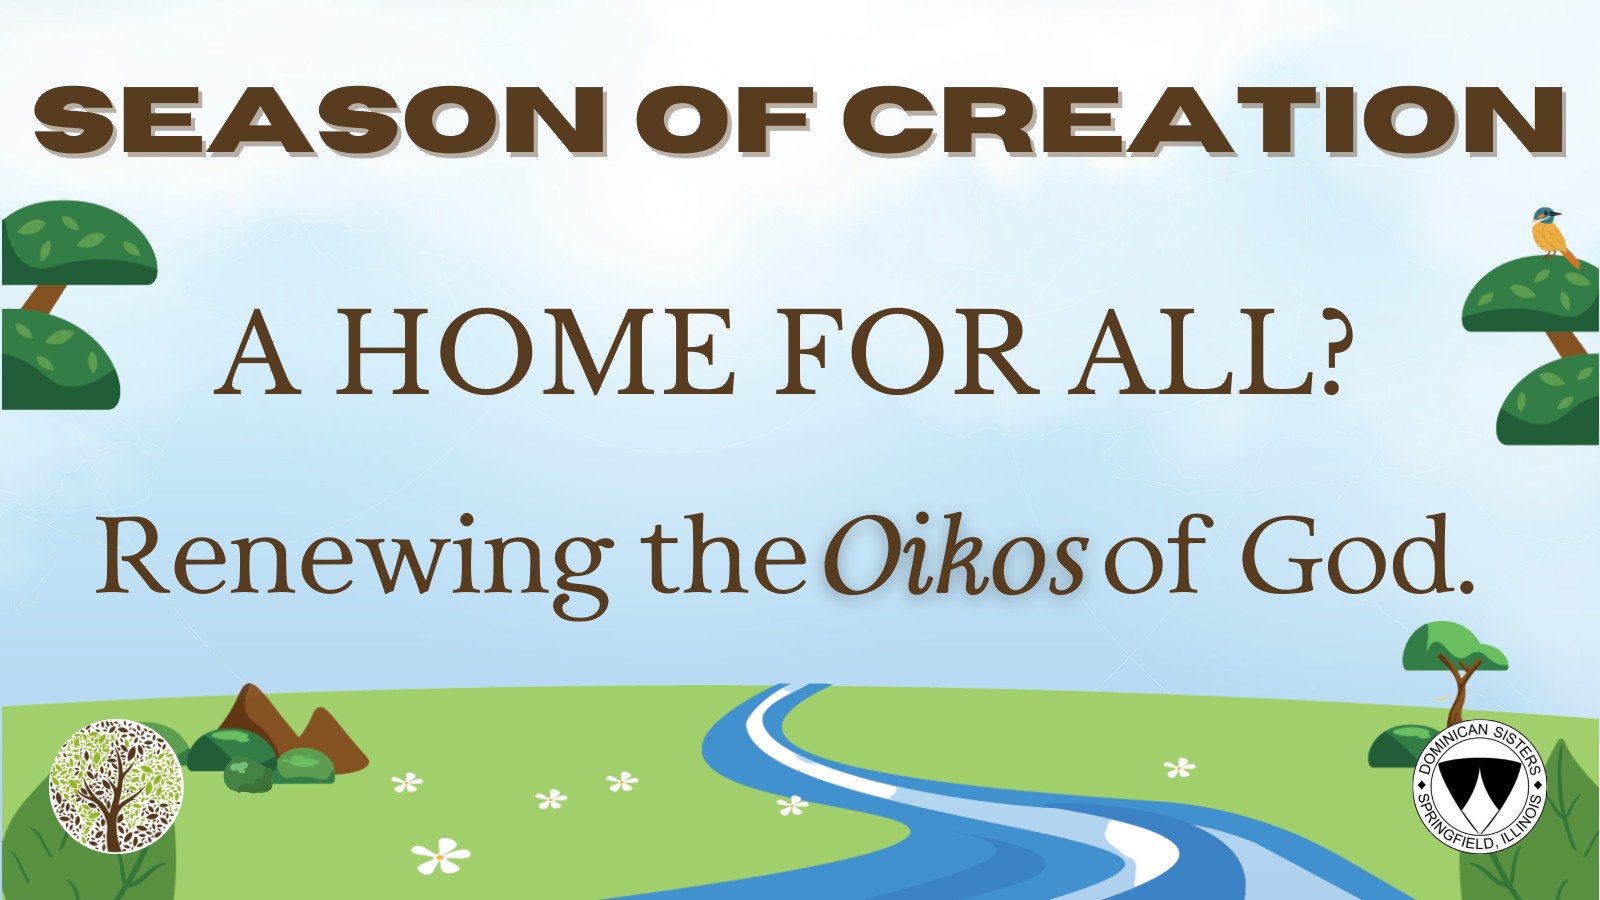 Season of Creation. A Home for All? Renewing the Oikos of God.